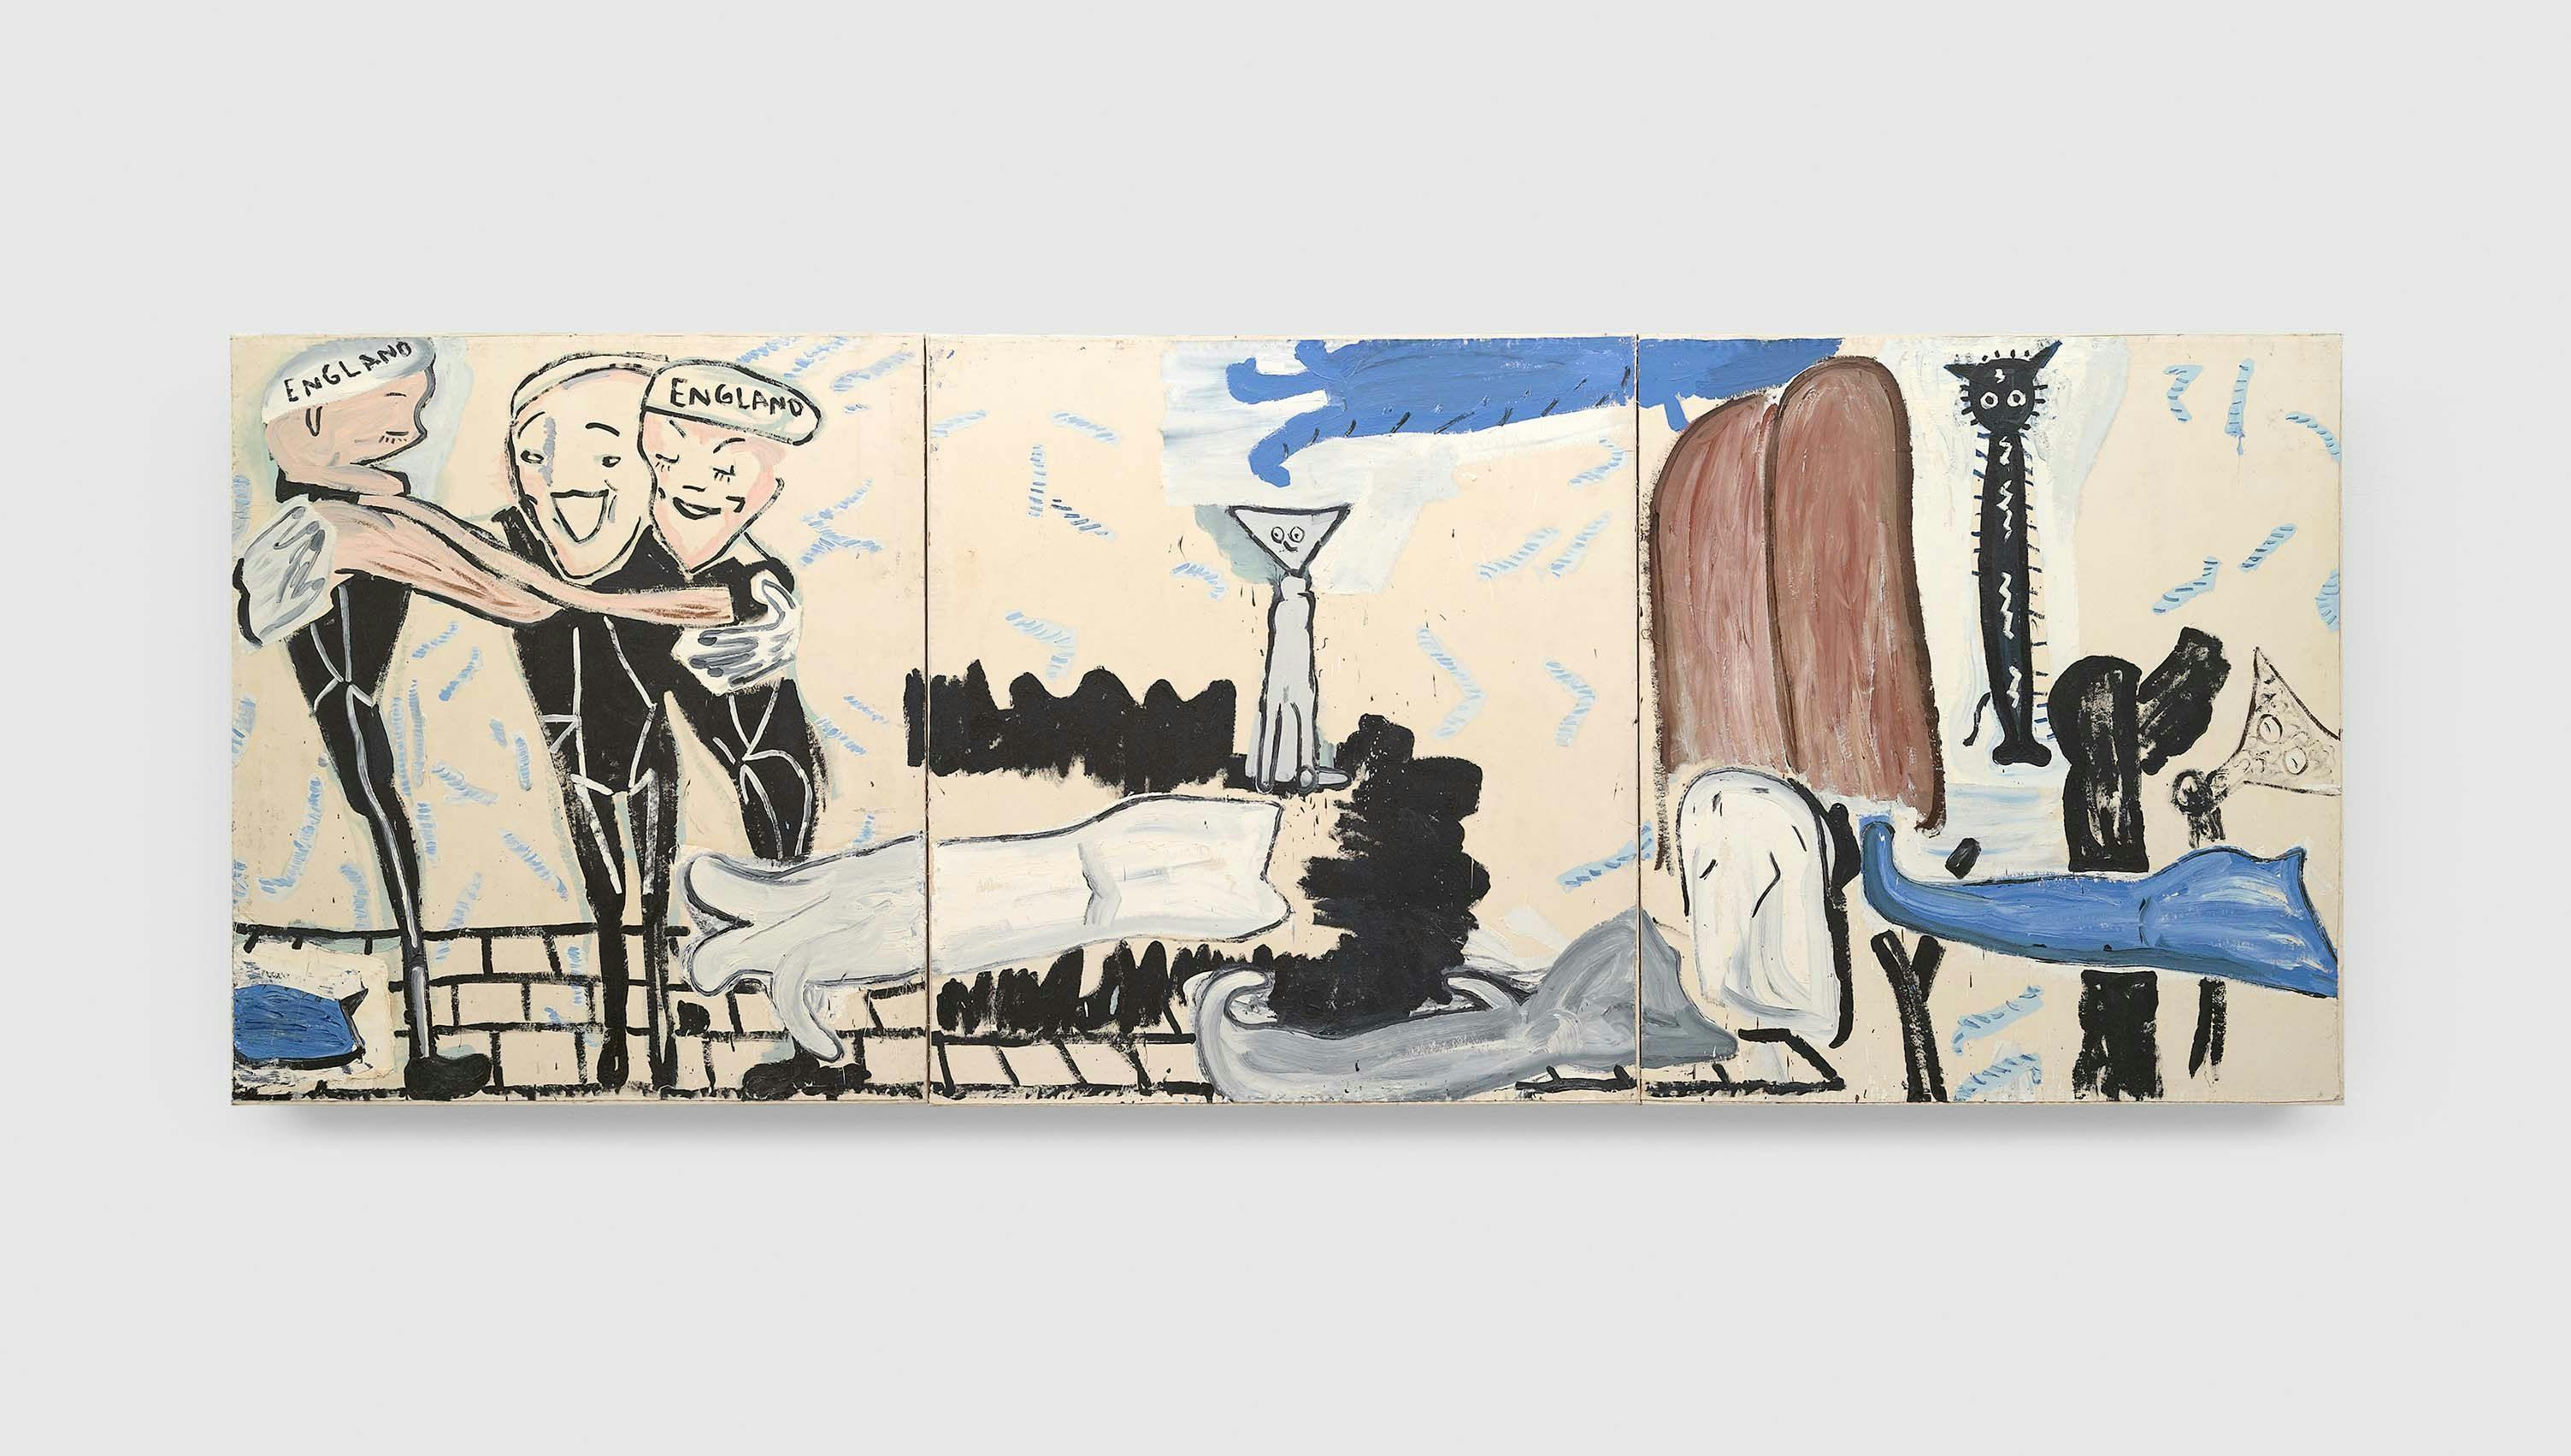 A painting by Rose Wylie, titled Swimming with Cats (Blue Twink), dated 2002.